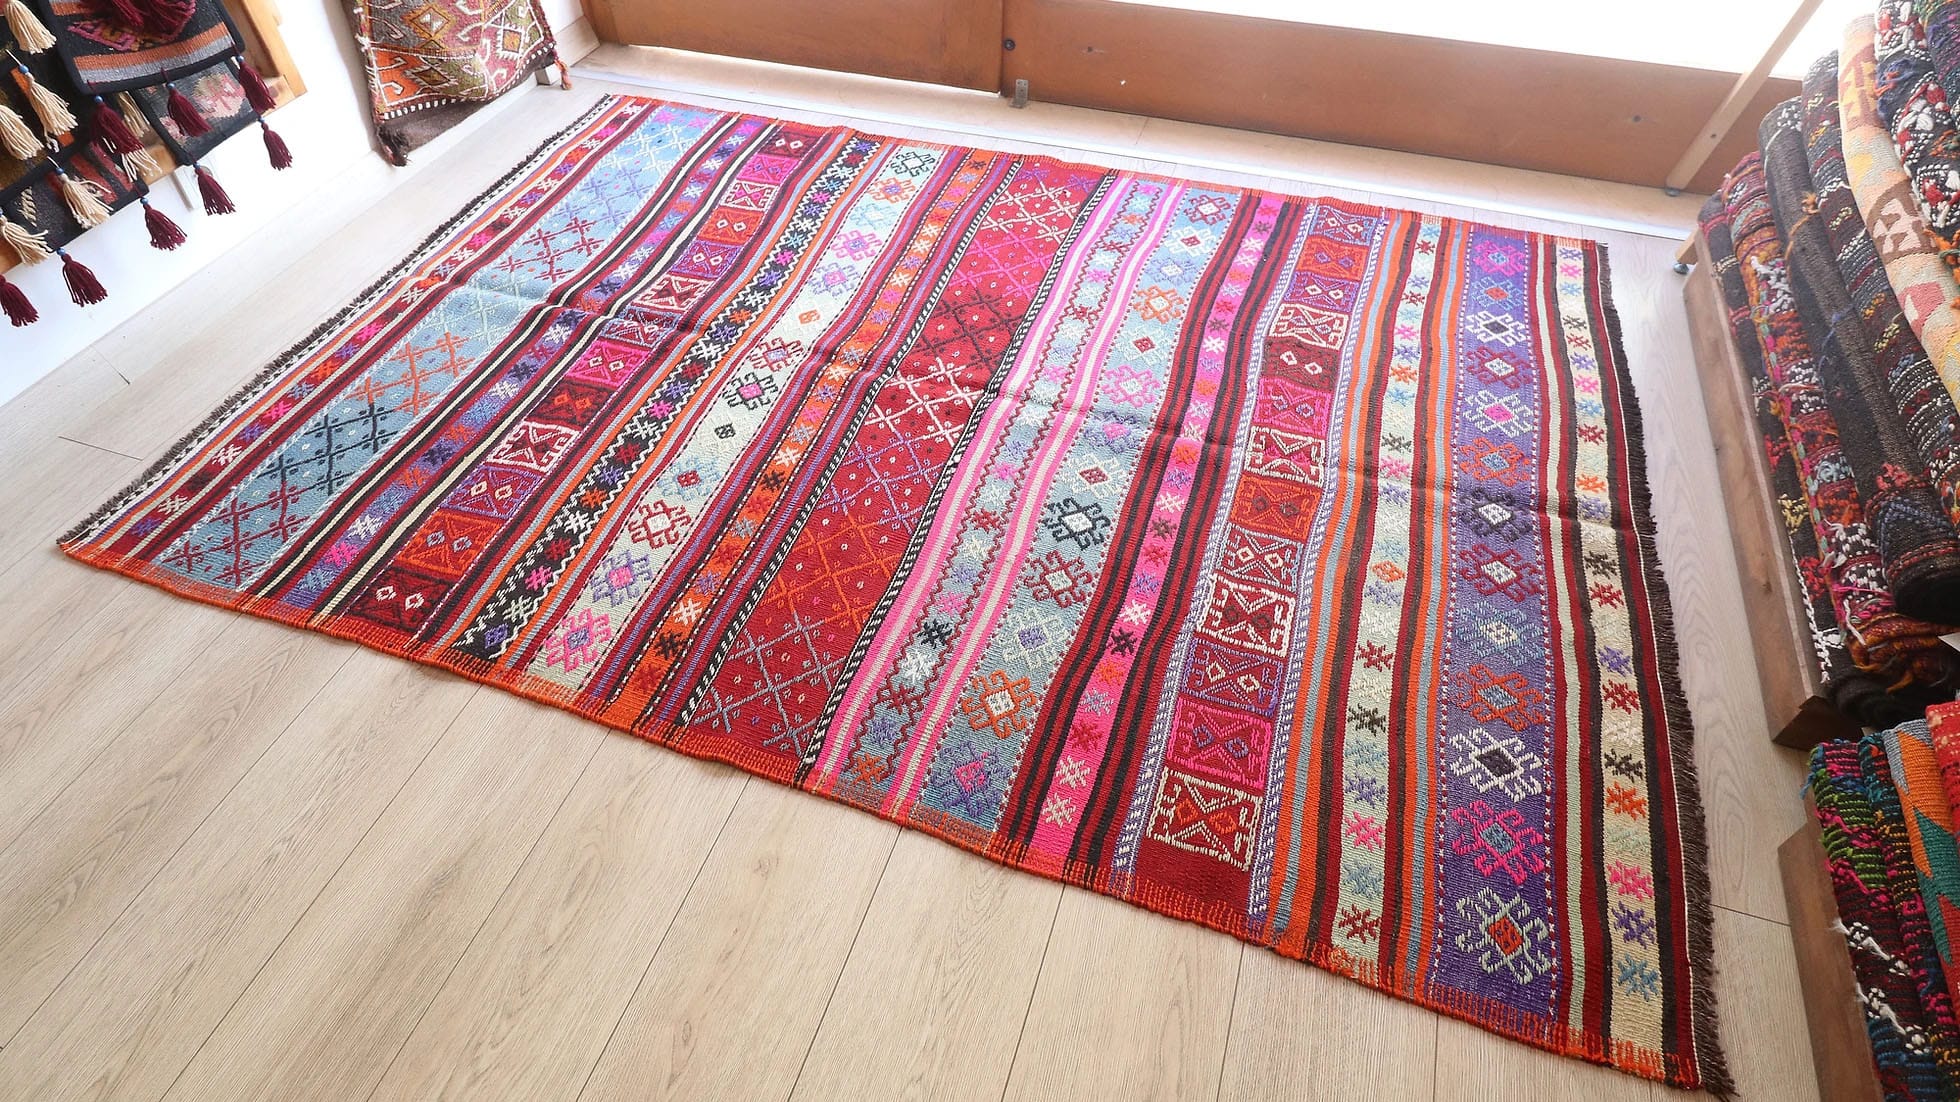 Handwoven Rustic Framhouse Wool Rug in Tribal Patterns